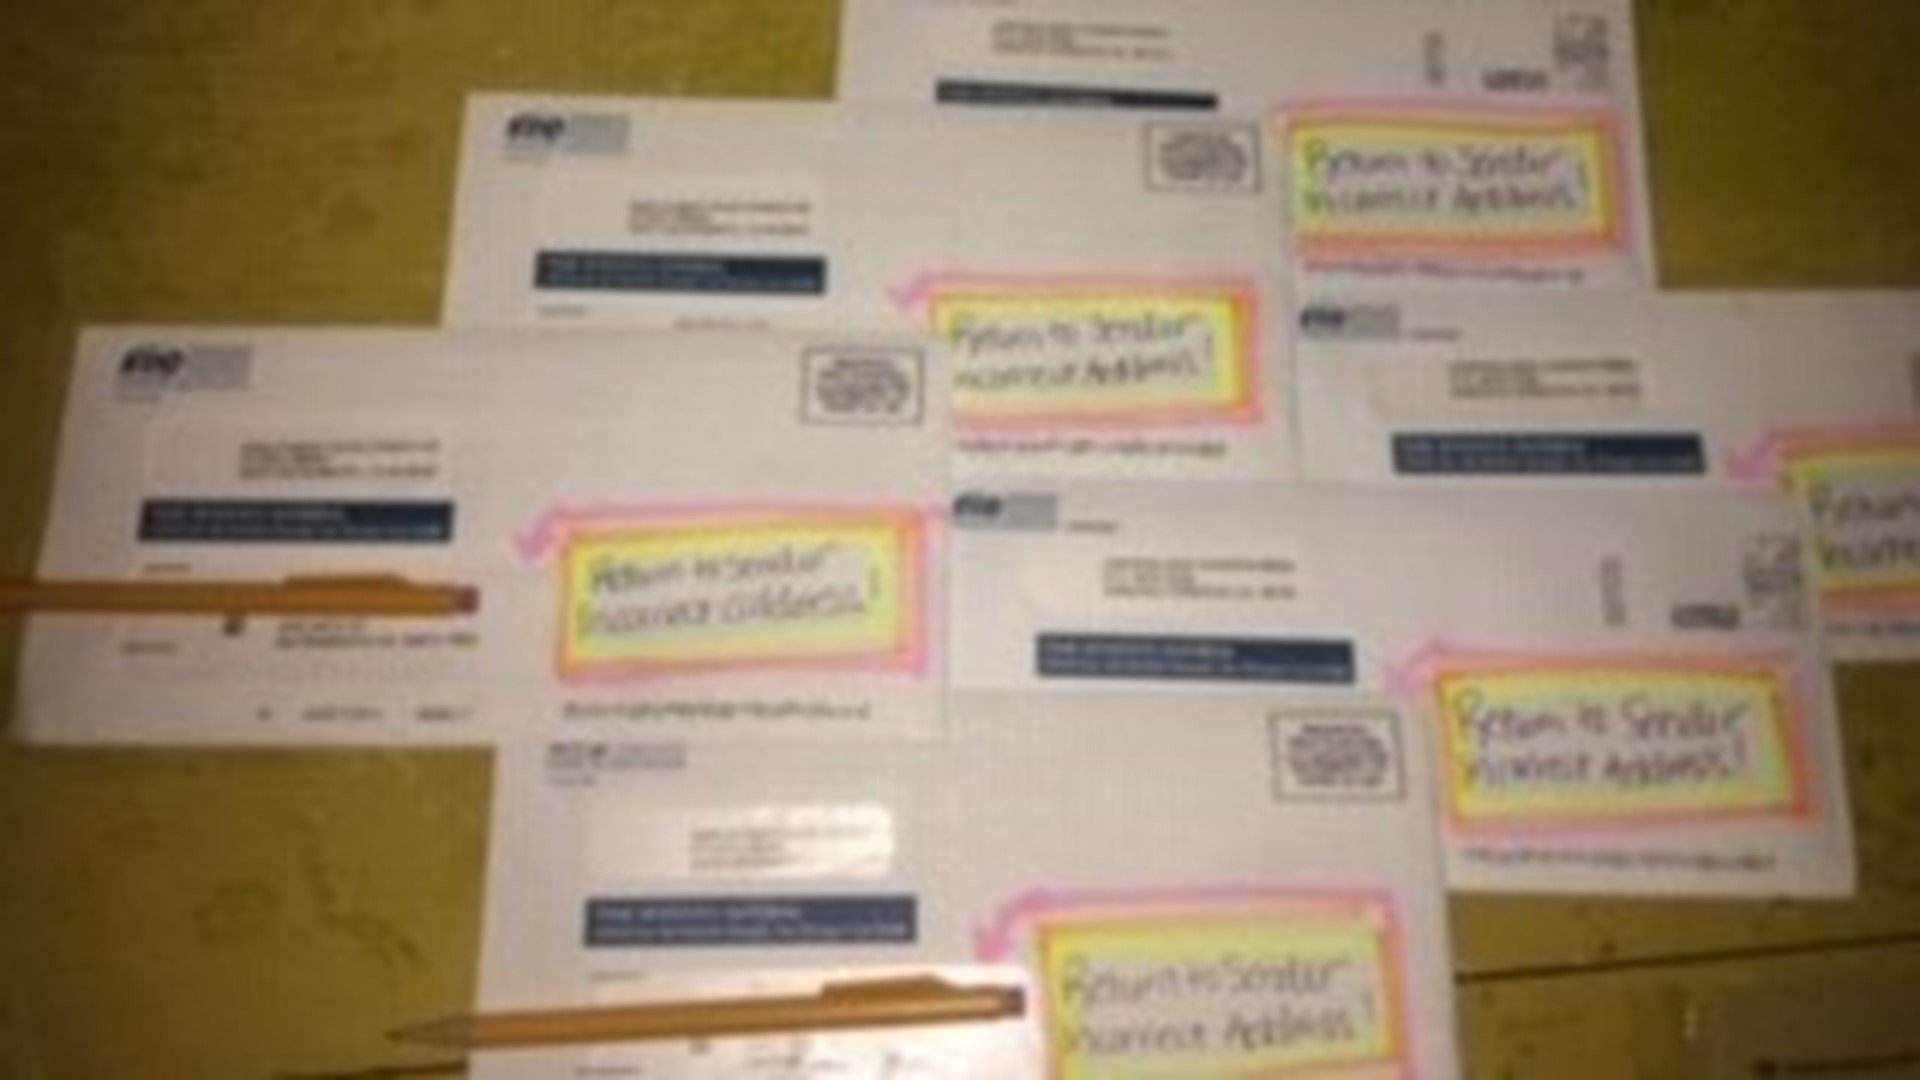 The audit is coming after multiple people are getting EDD letters addressed to other people, but sent to the wrong address.